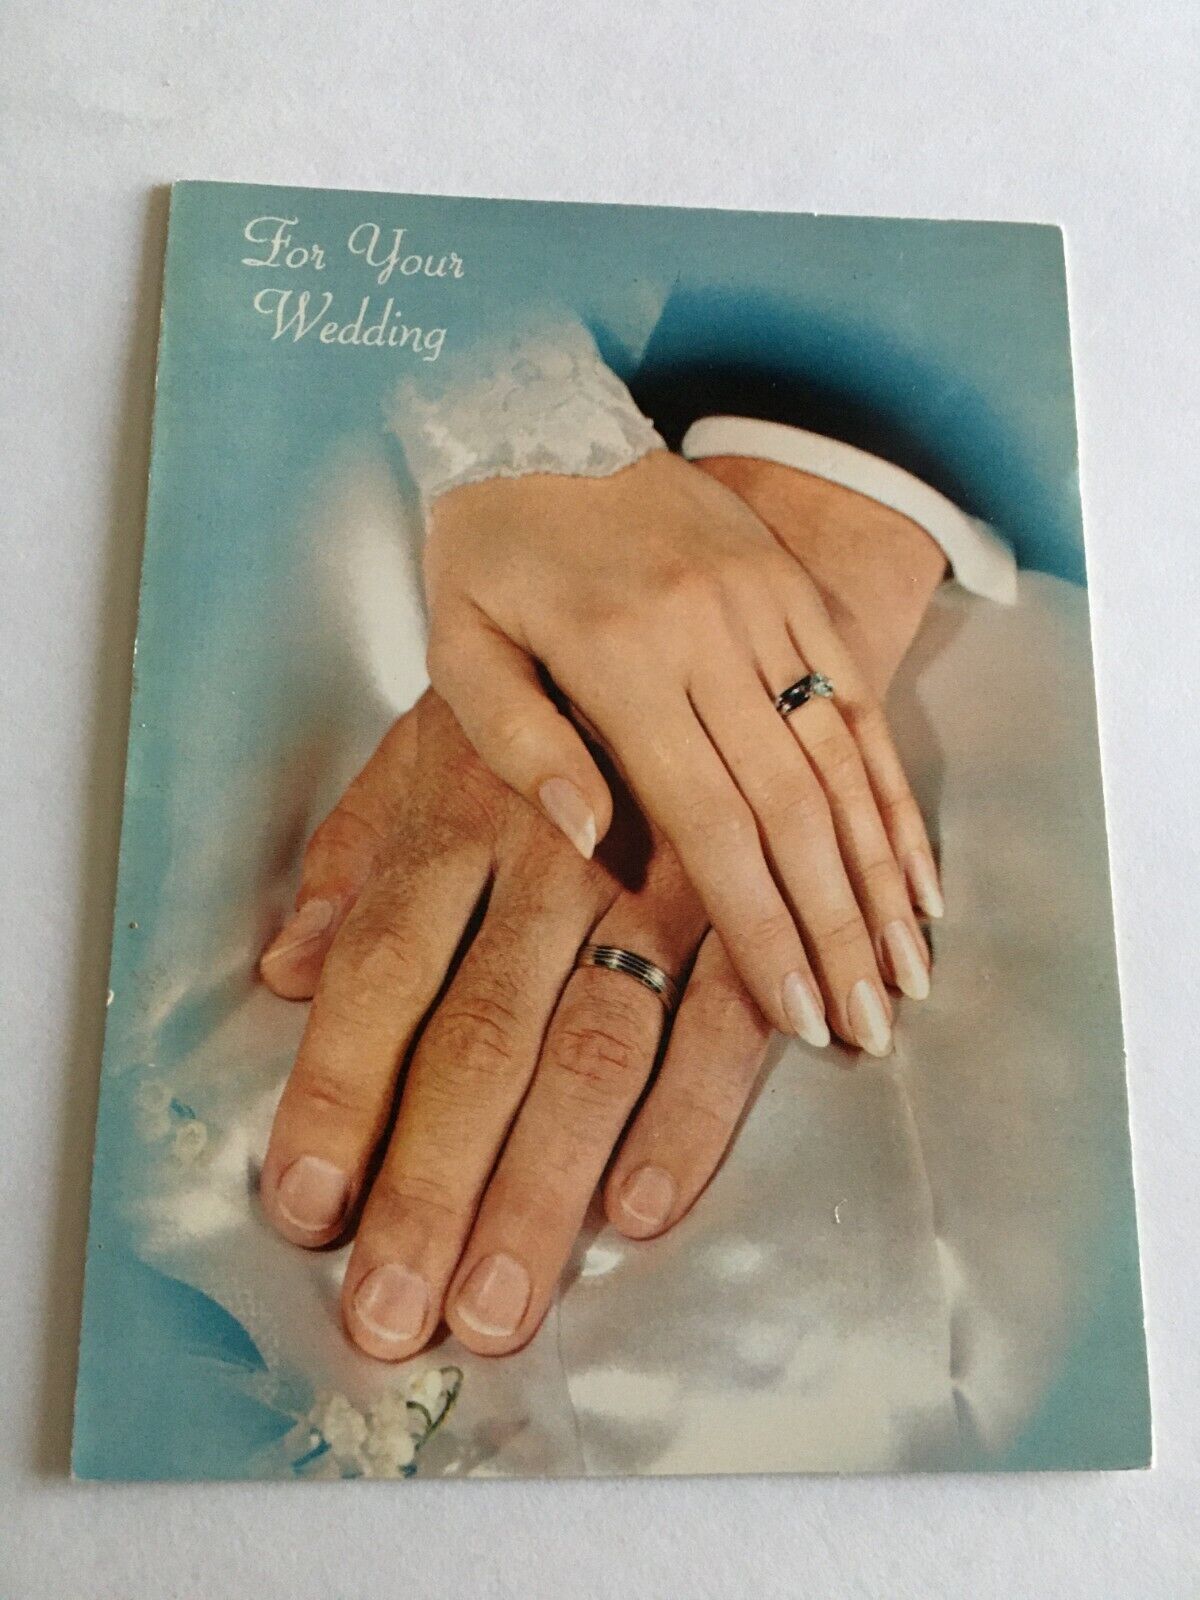 Vintage 1960s Greeting Card Wedding Holding Hands Collectible ...